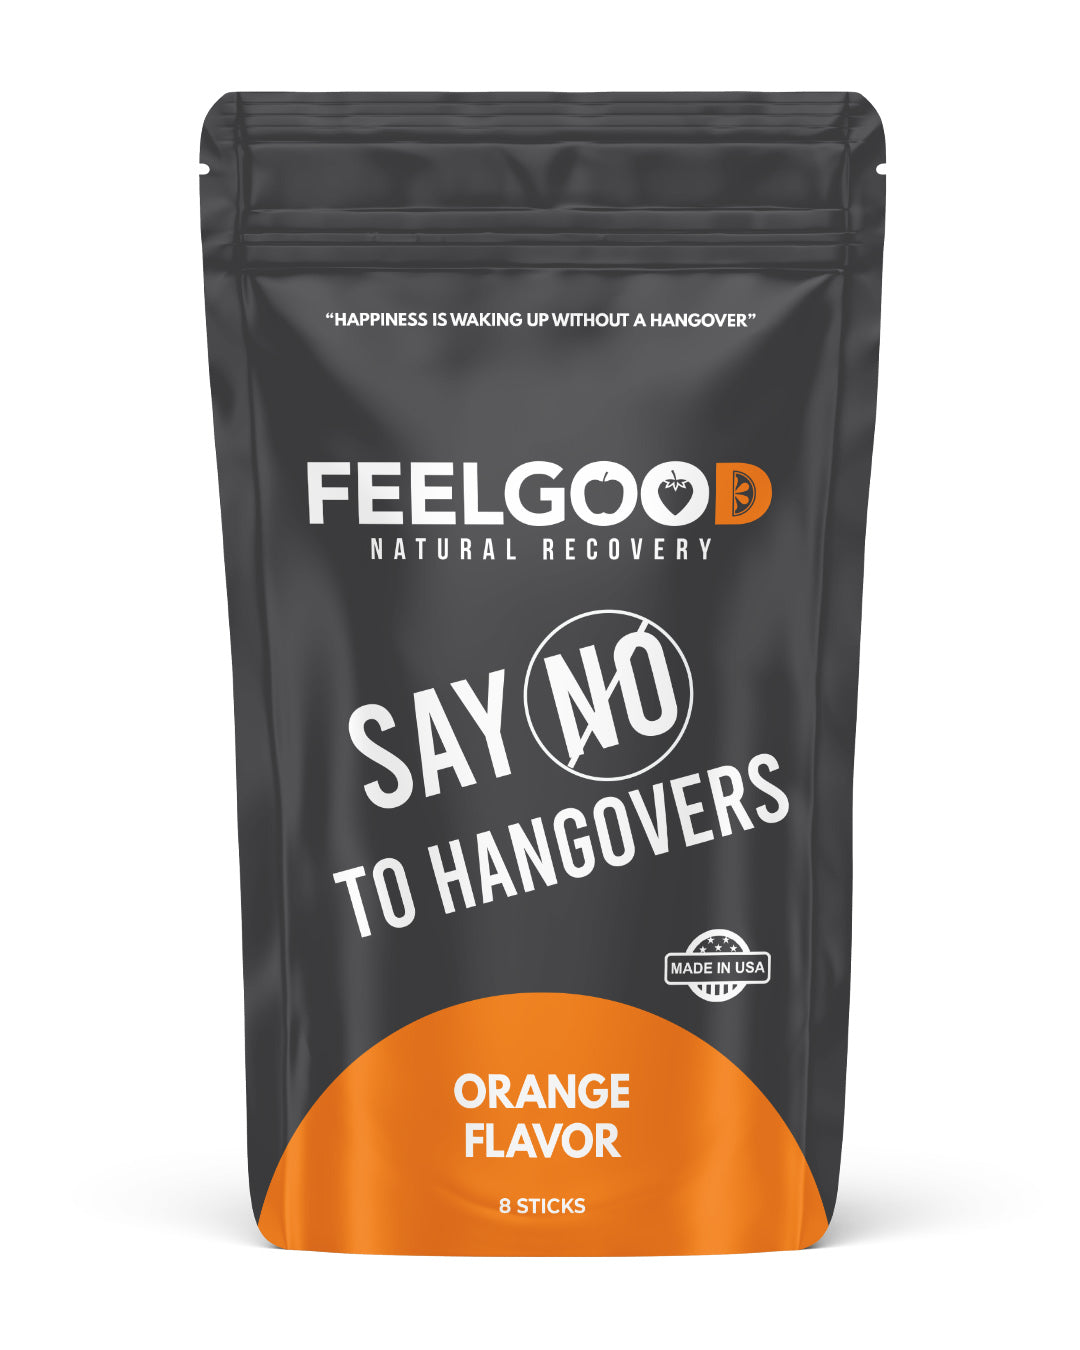 Hangover Cures: Do These New Flashy Ones Work?